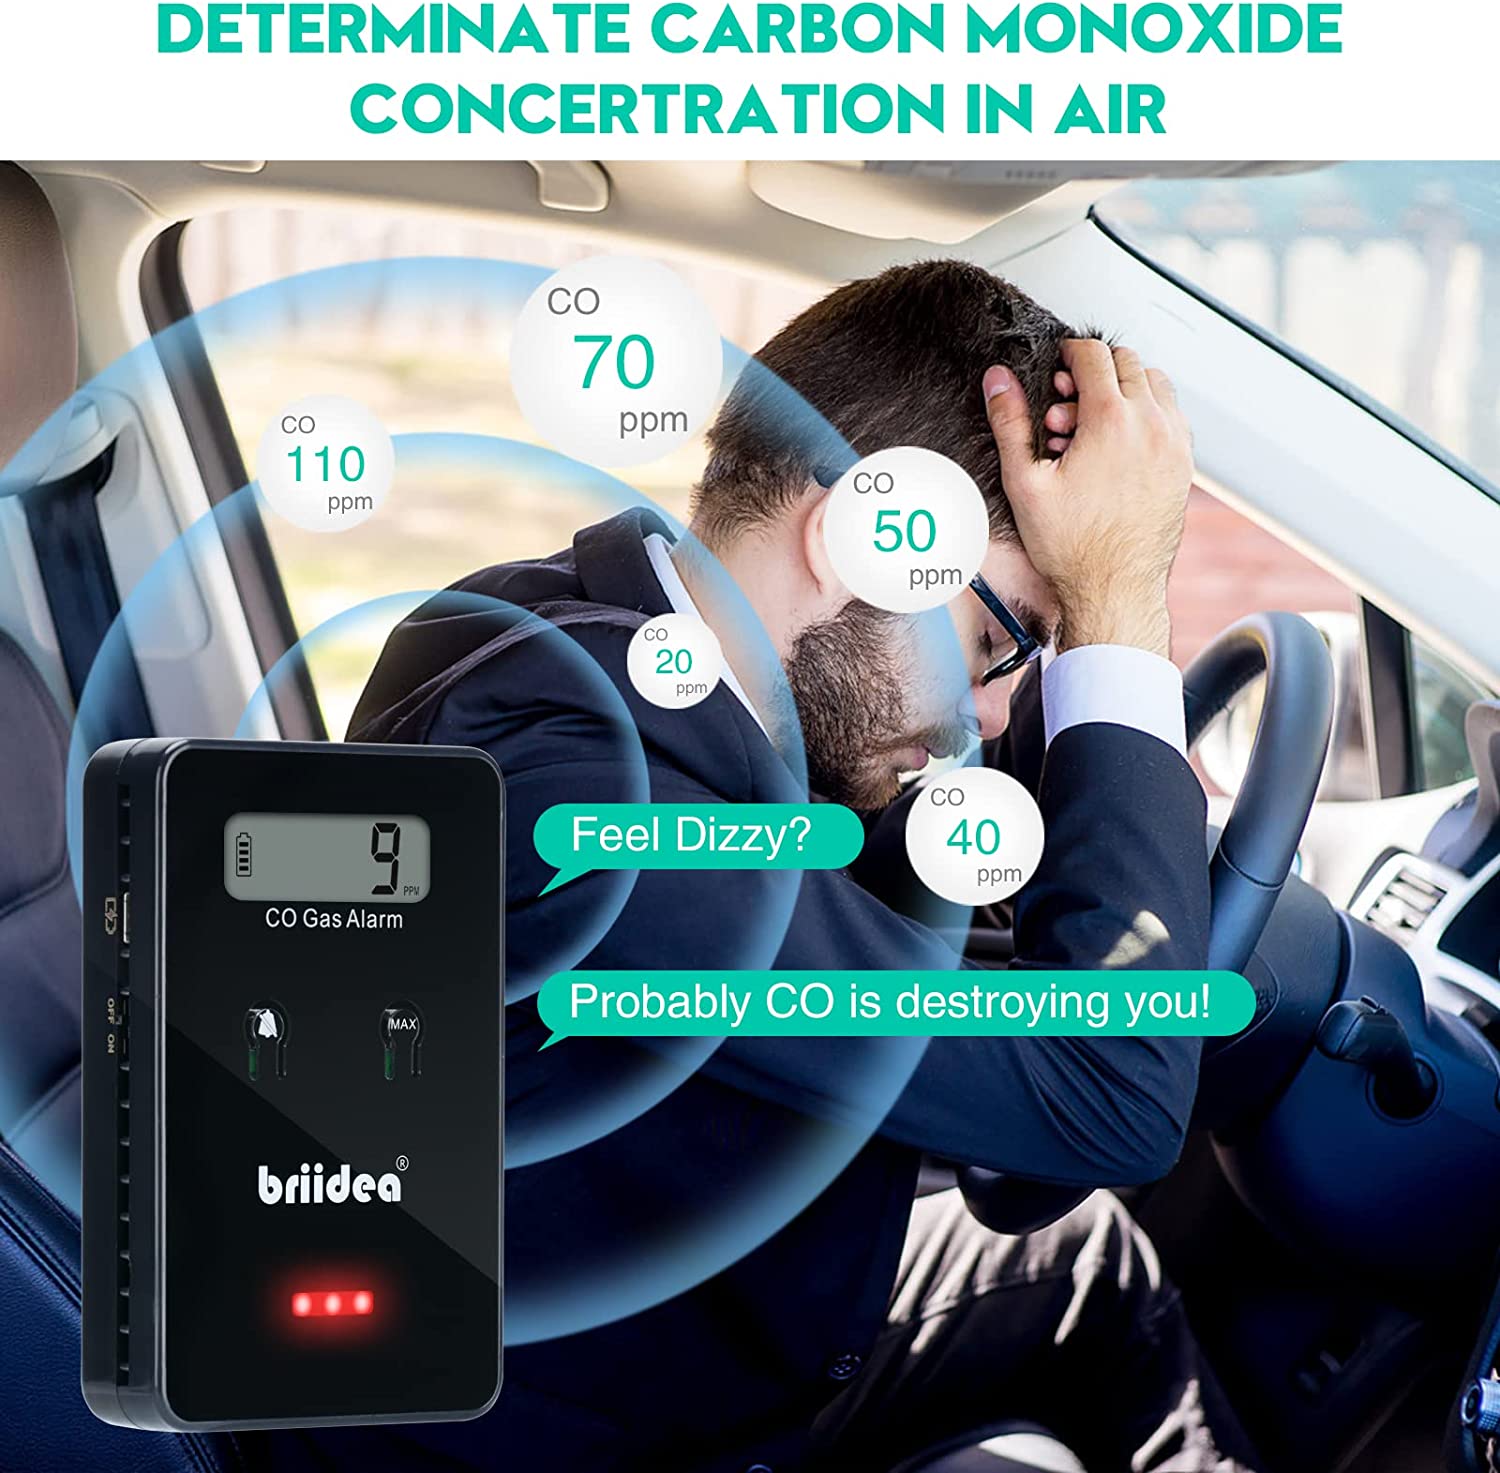 Carbon Monoxide Detector for Car, Briidea Low-Level Fast 9ppm Alarm CO Detector, Widely Used in Vehicles Aircraft Travel Bus Trucks, Black